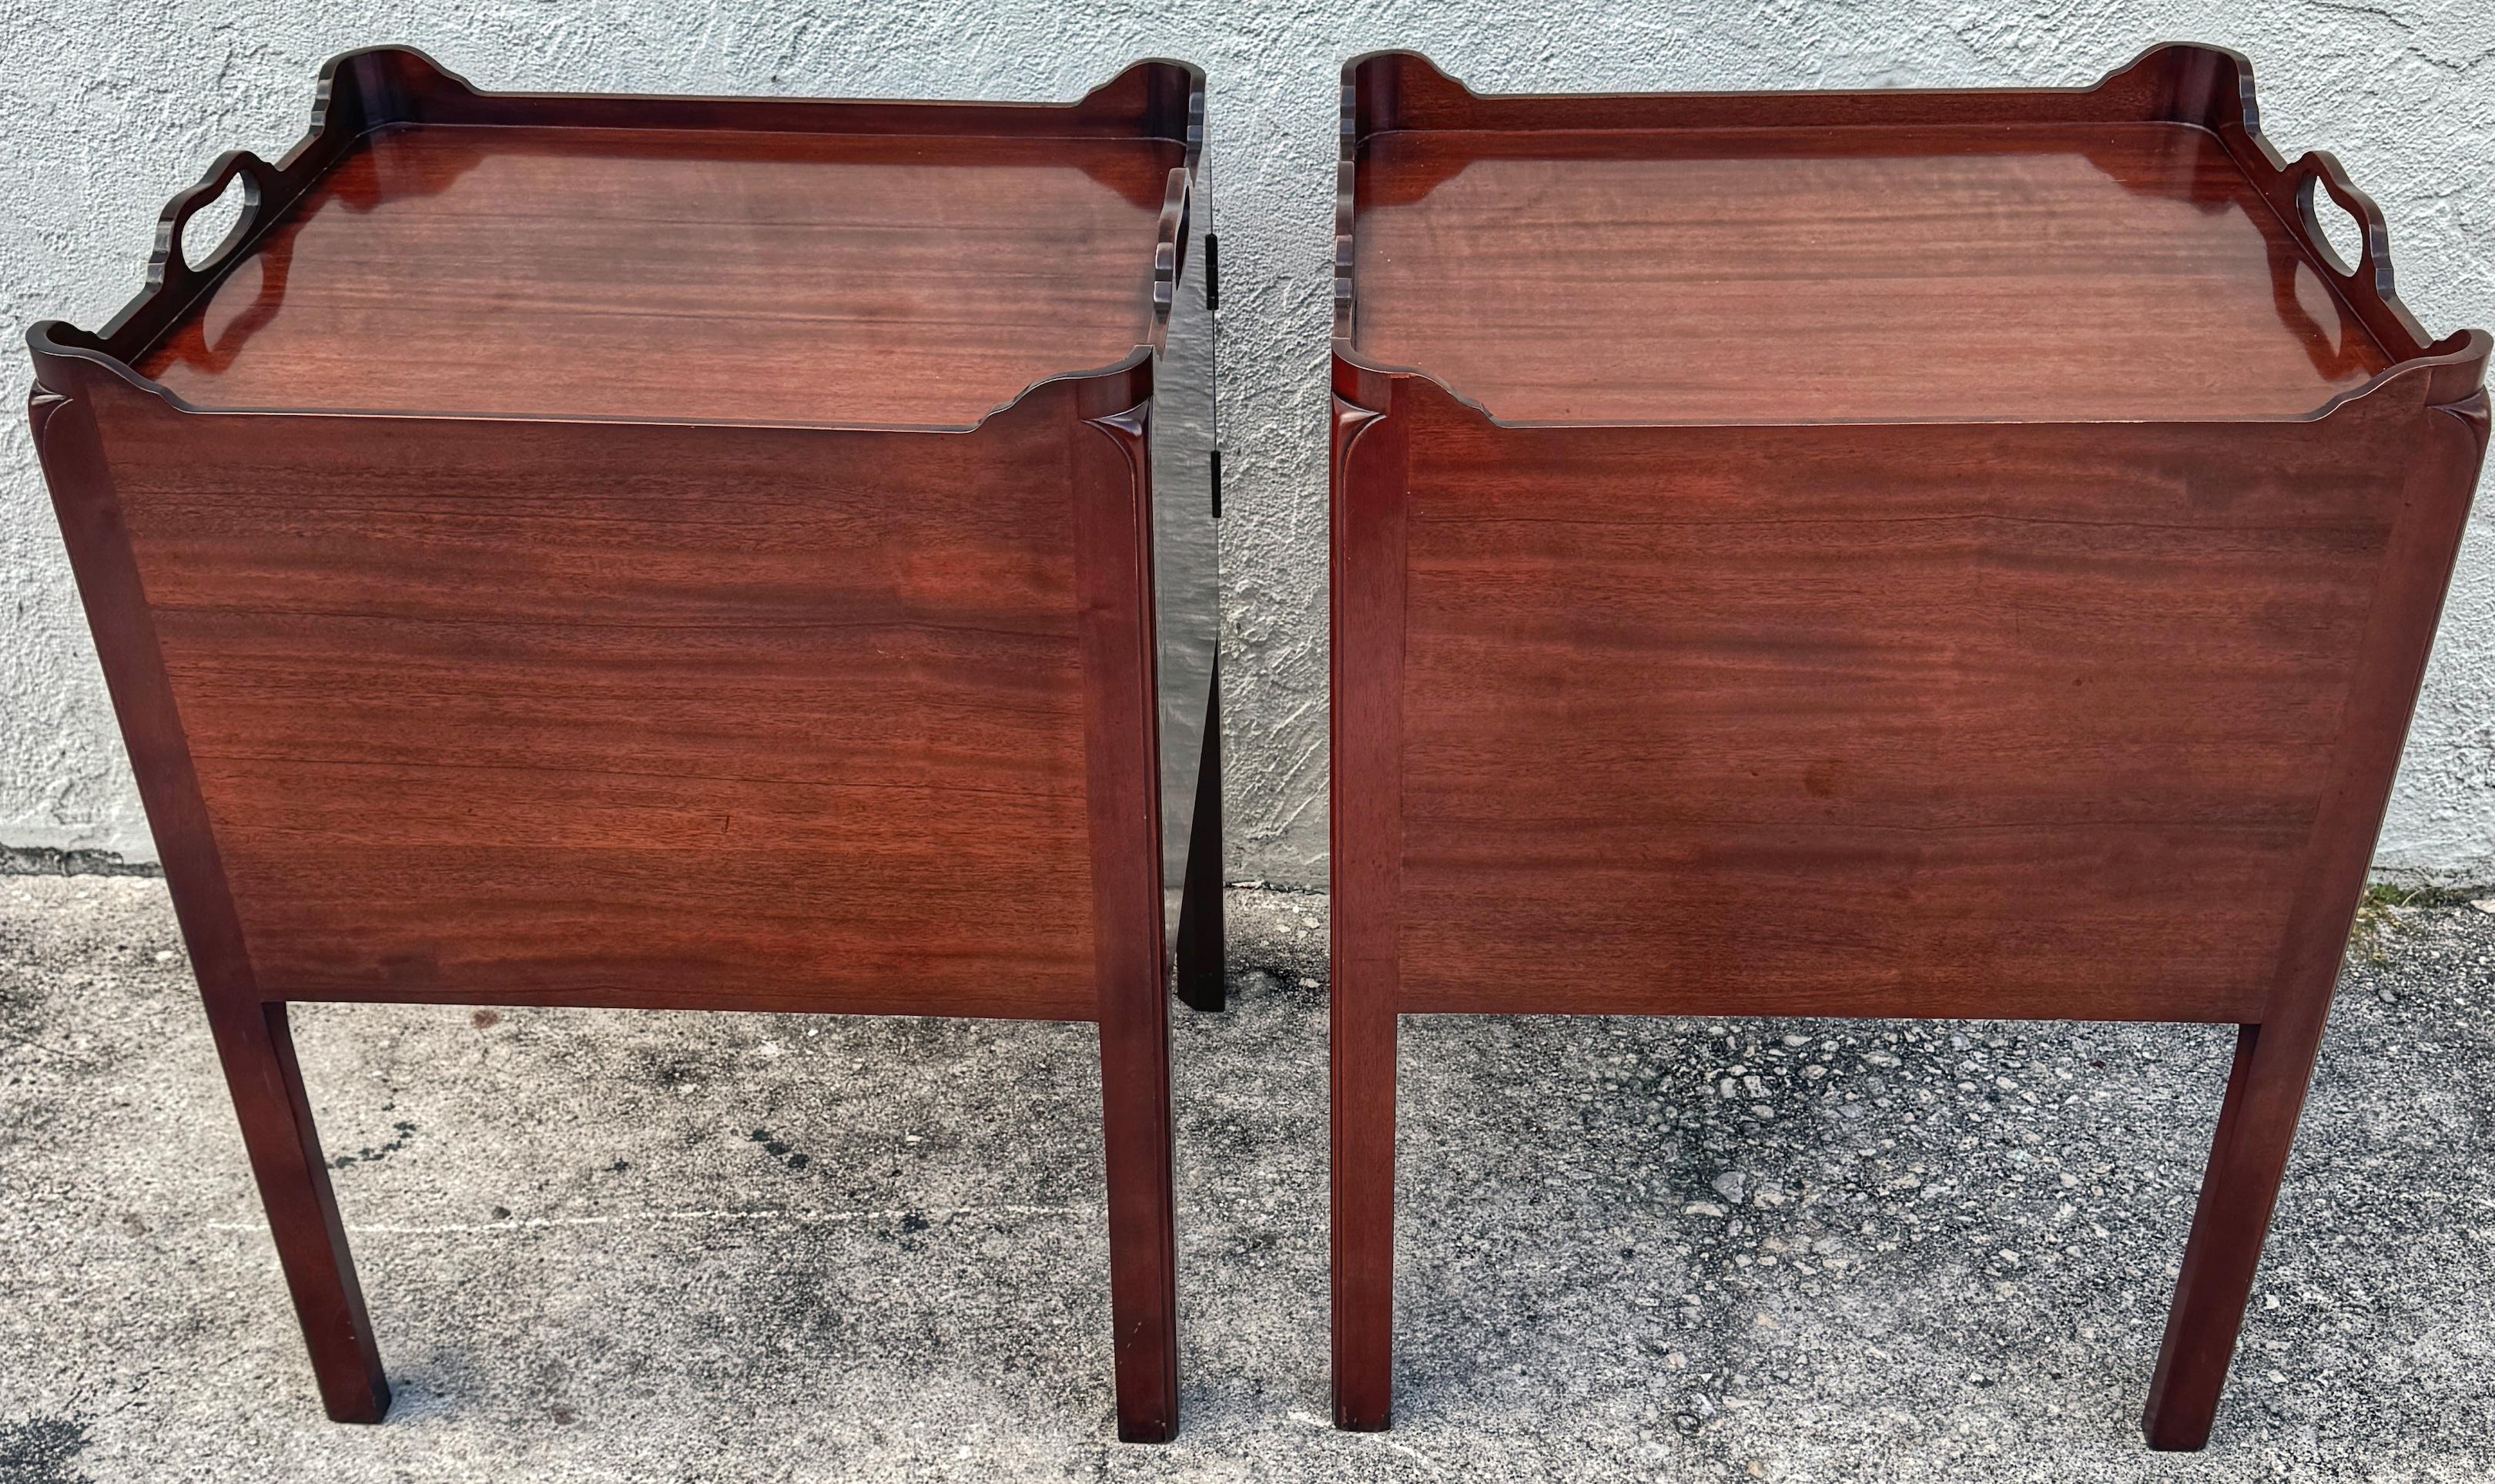 20th Century Pair of Georgian Style Mahogany & Leather Book Spine Front End Tables  For Sale